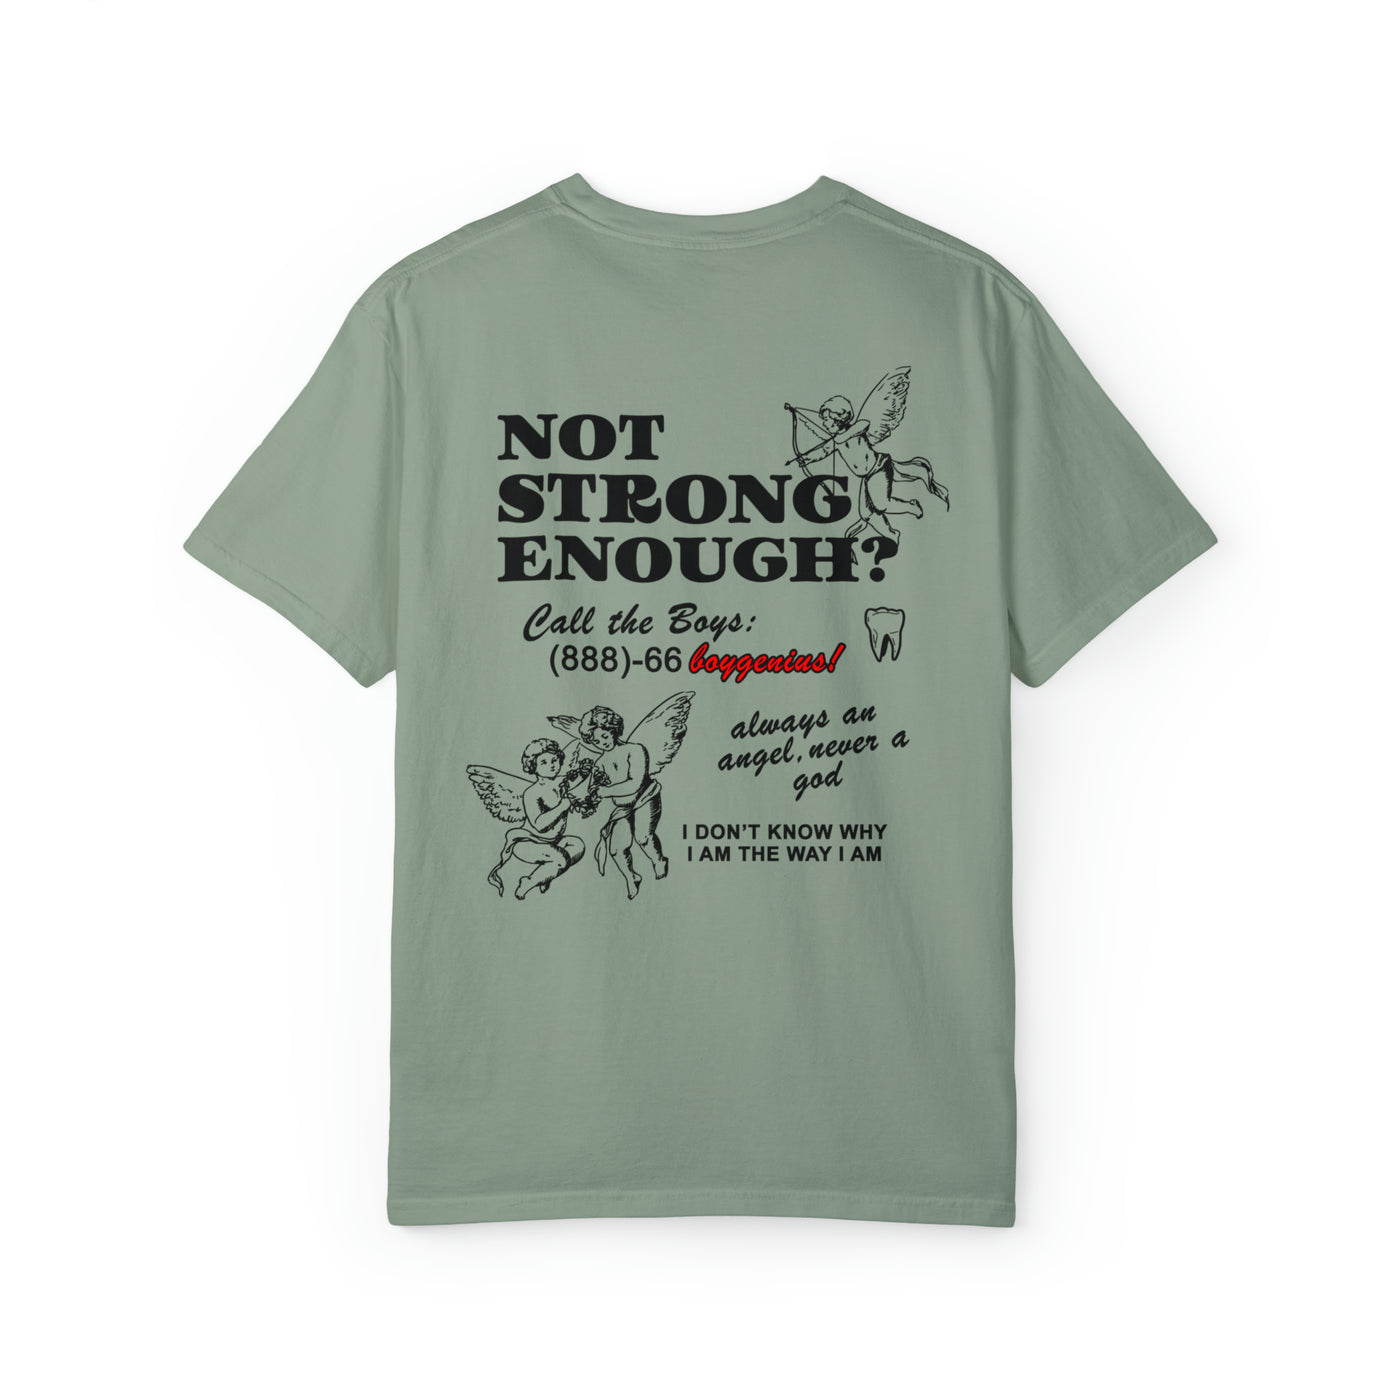 Not Strong Tee